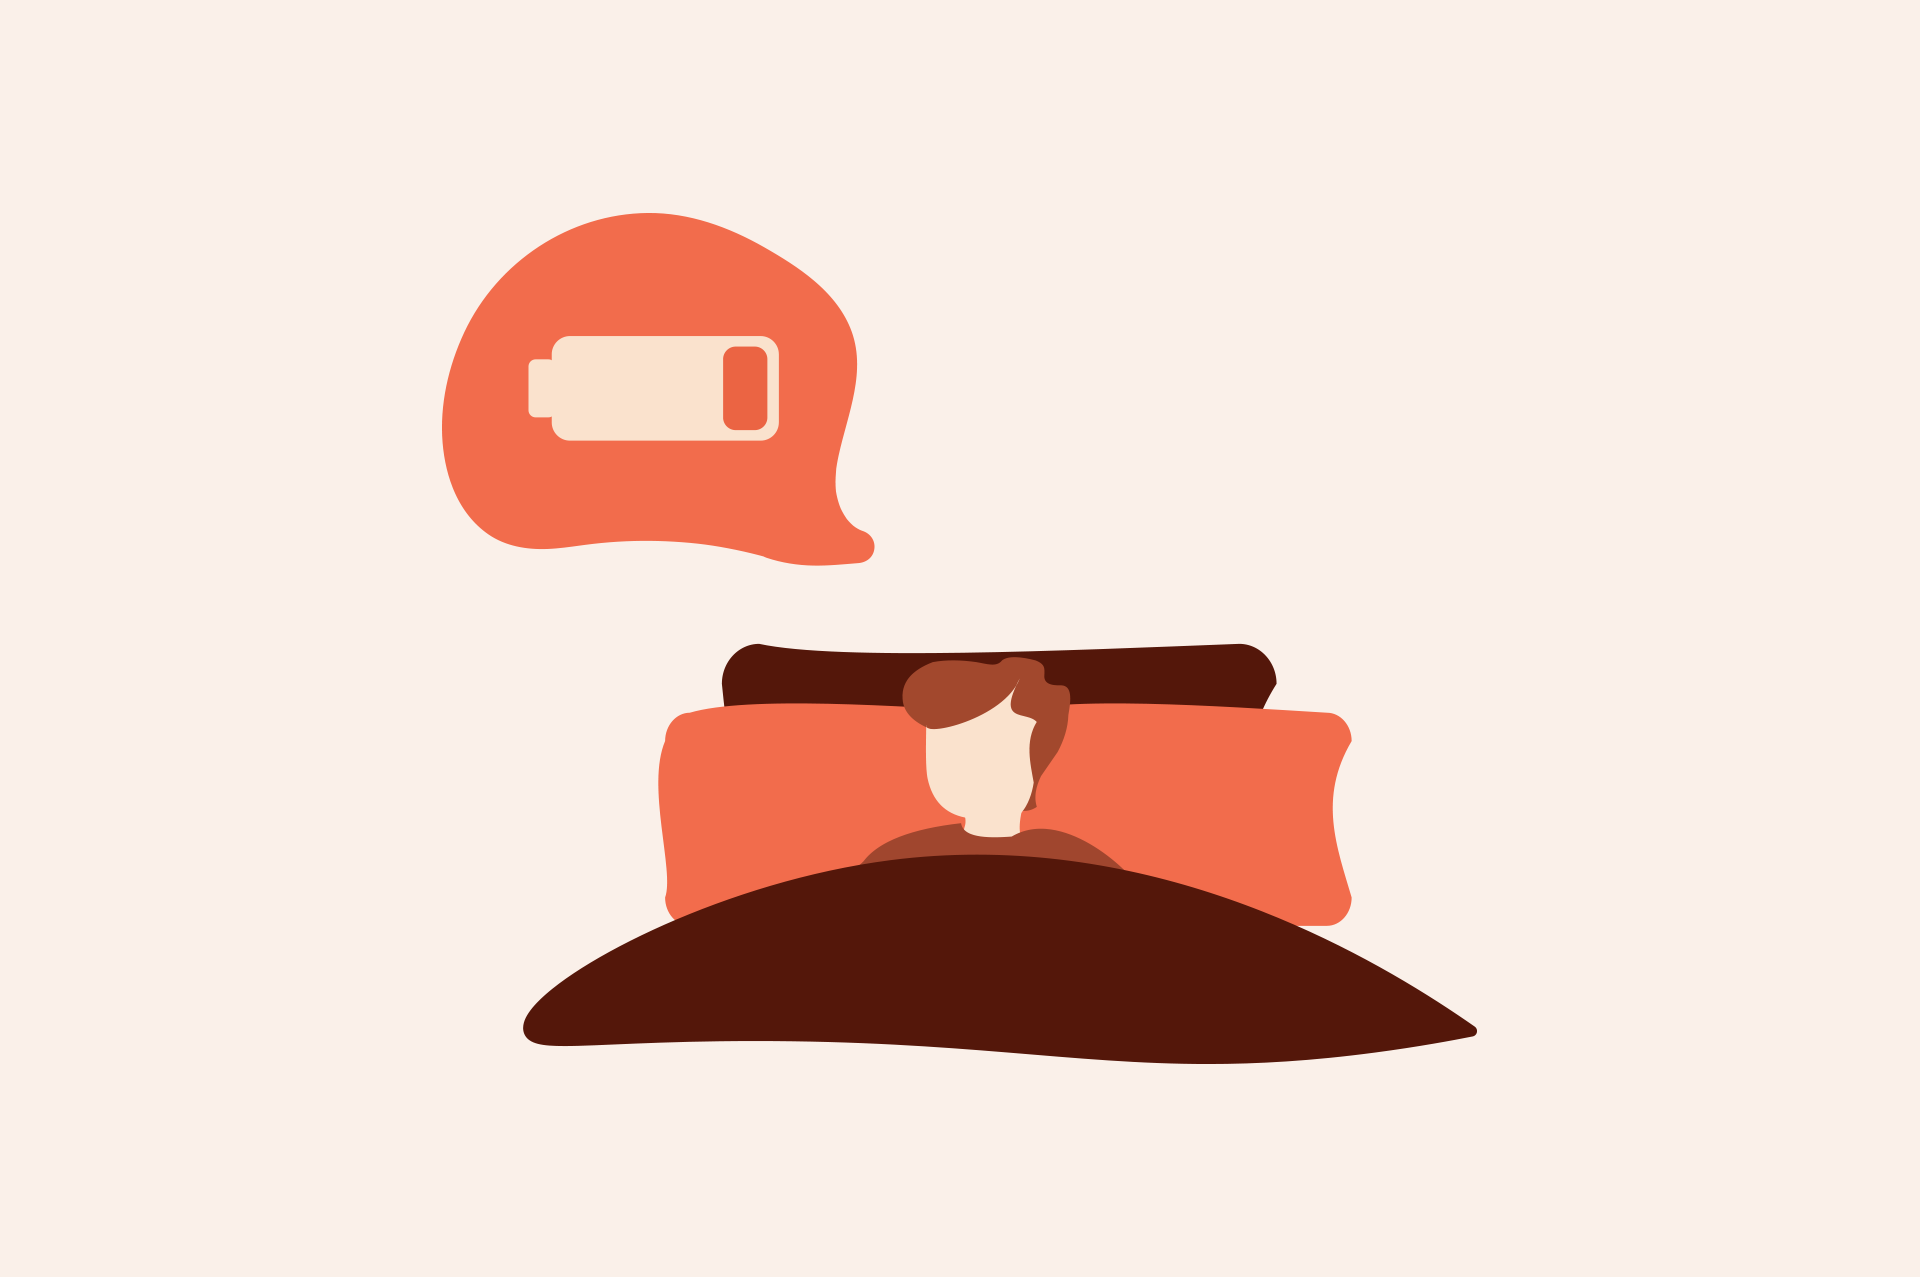 Illustration of a person lying in bed who can't sleep